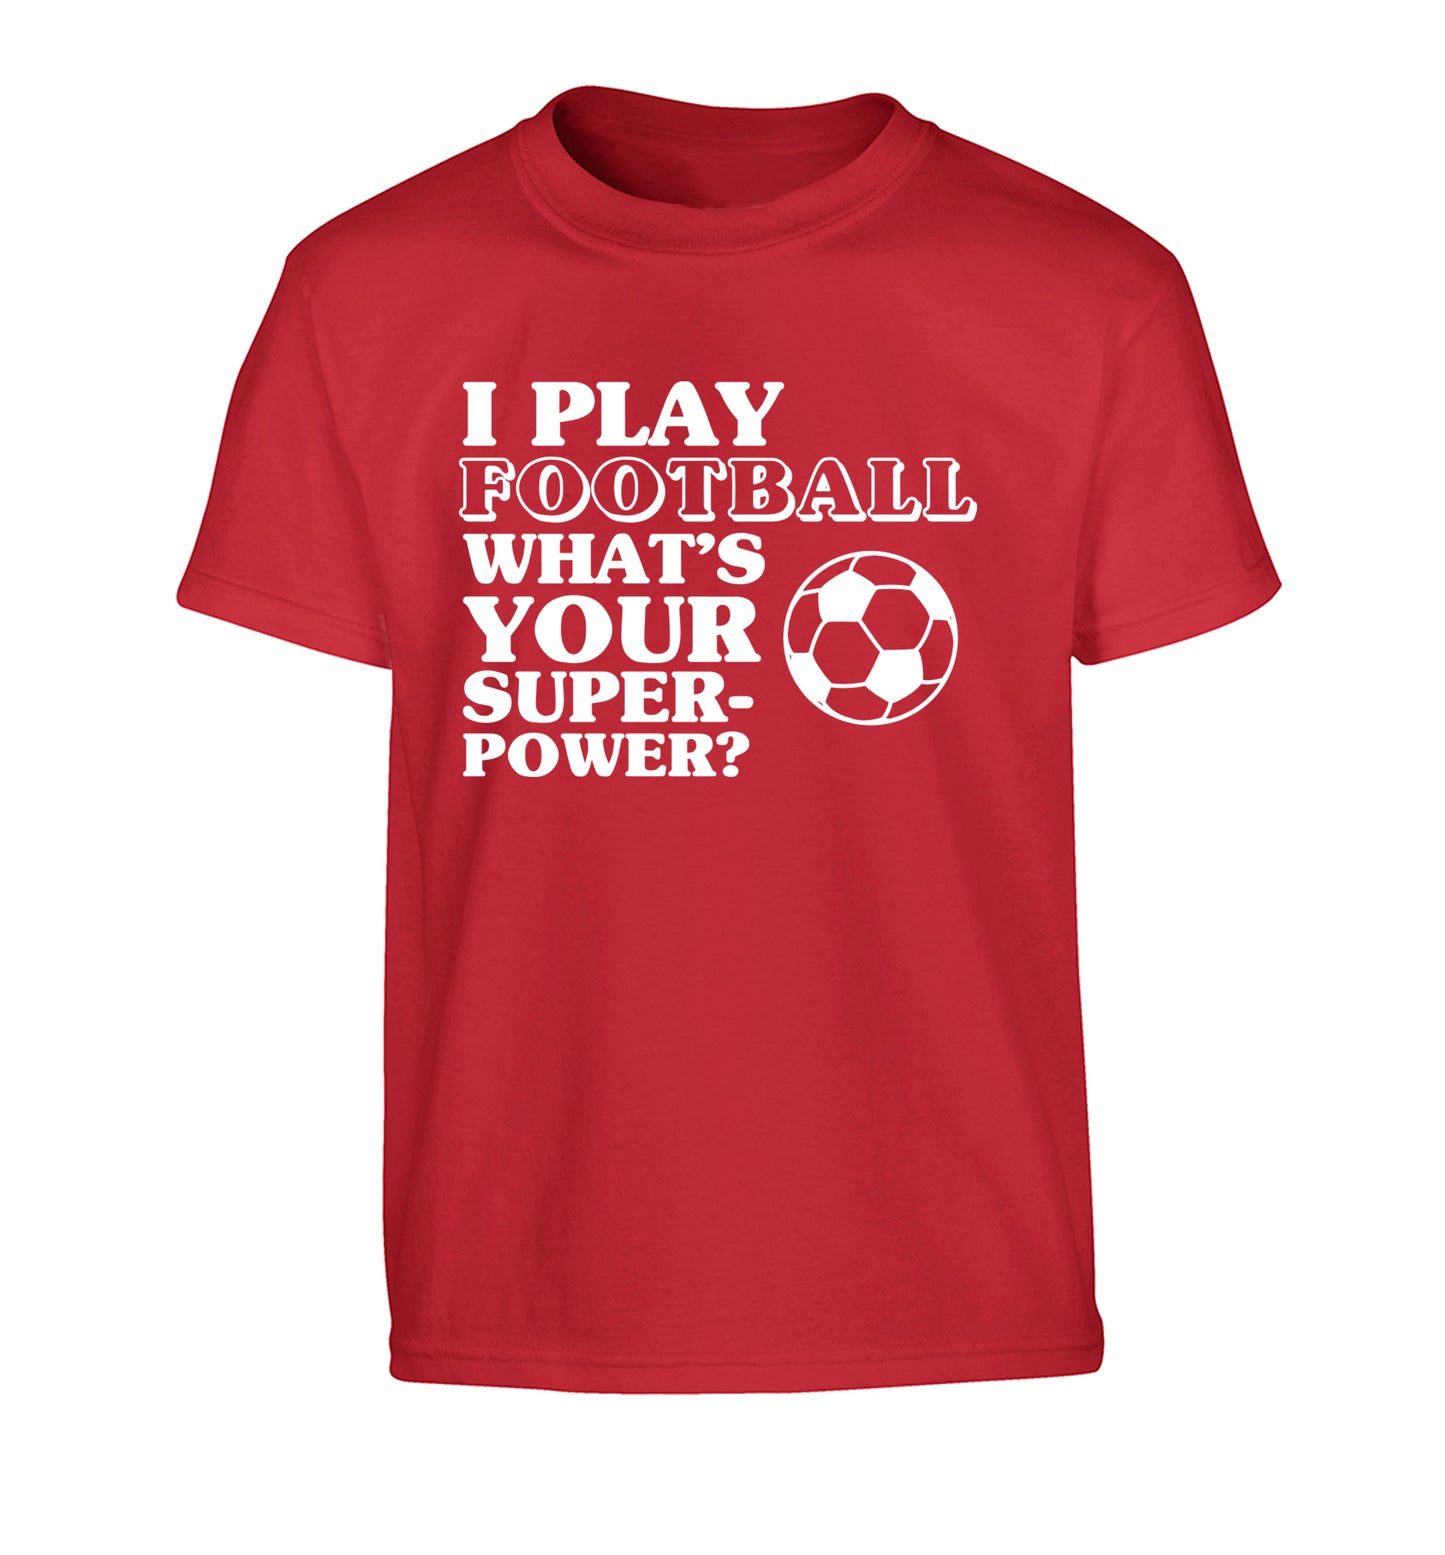 I play football what's your superpower? Children's red Tshirt 12-14 Years